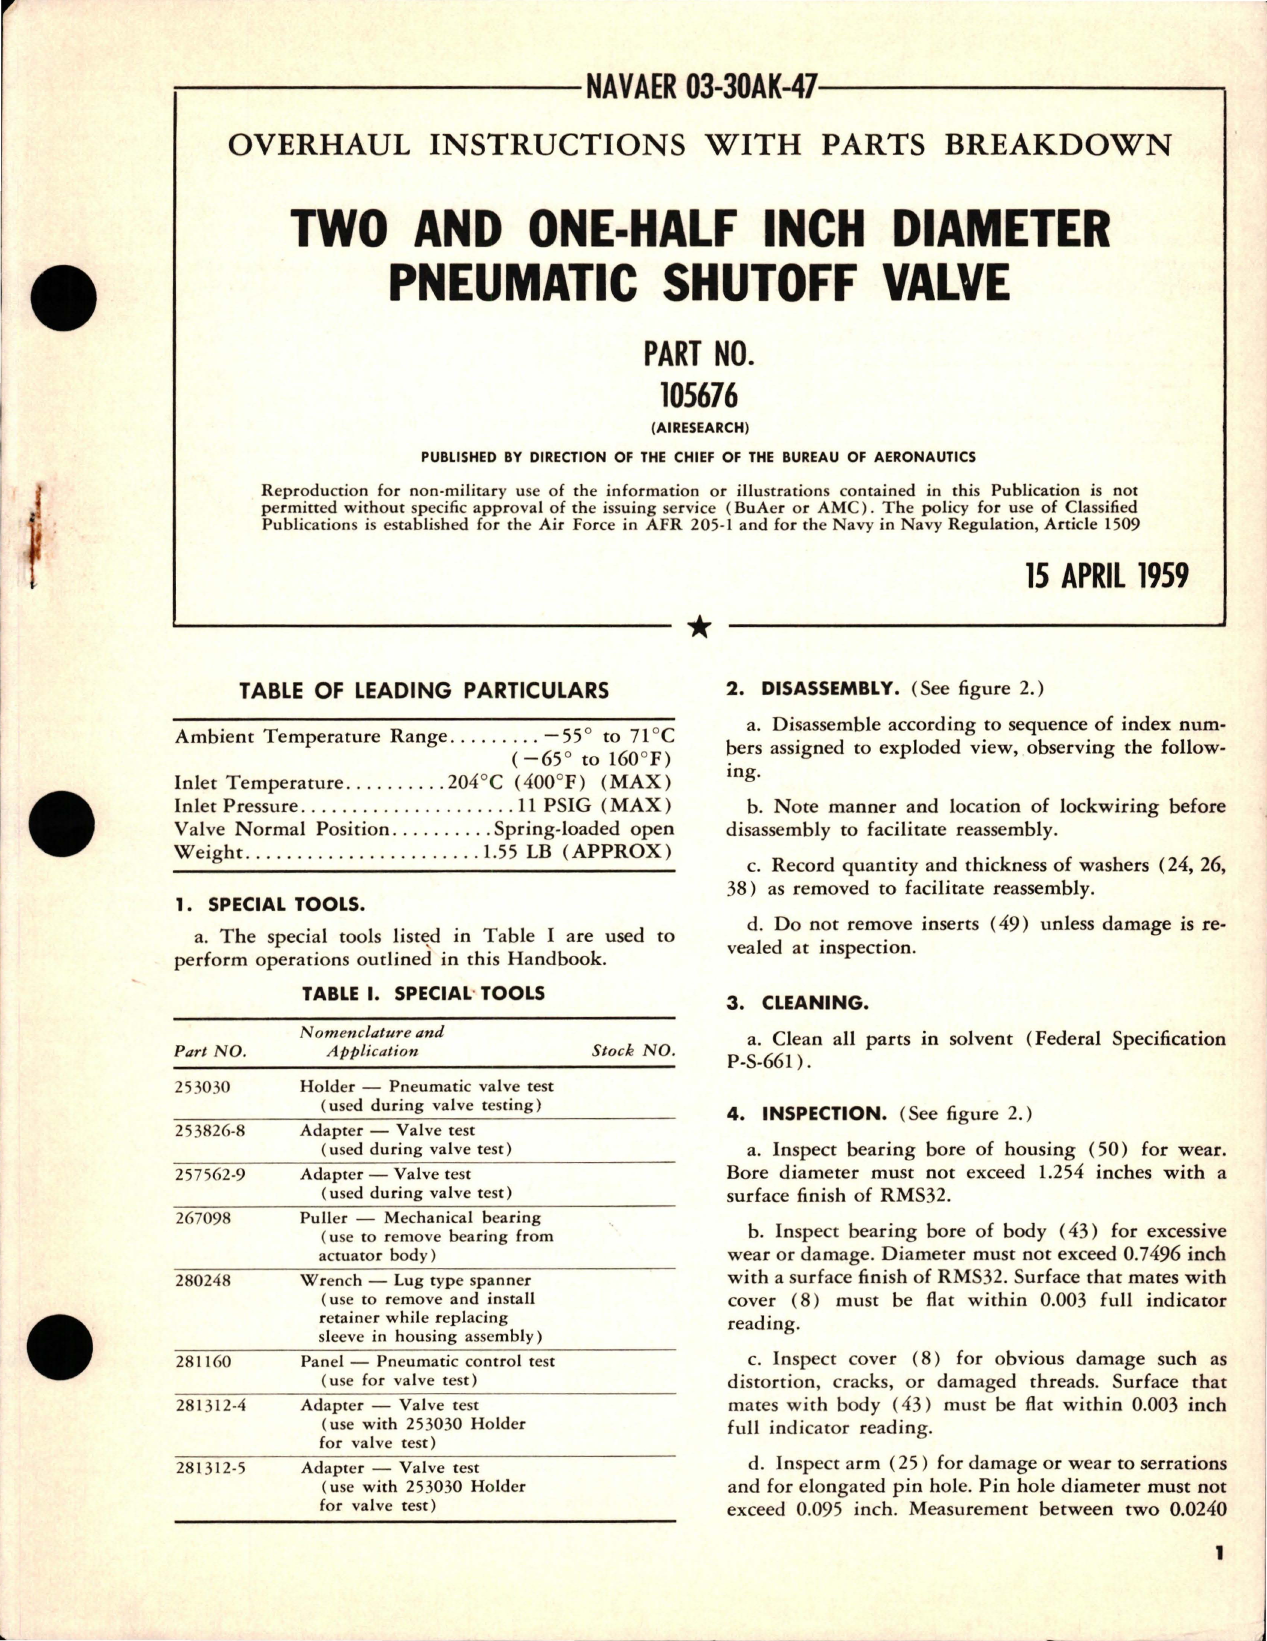 Sample page 1 from AirCorps Library document: Overhaul Instructions with Parts Breakdown for Two and One-Half Inch Diameter Pneumatic Shutoff Valve - Part 105676 